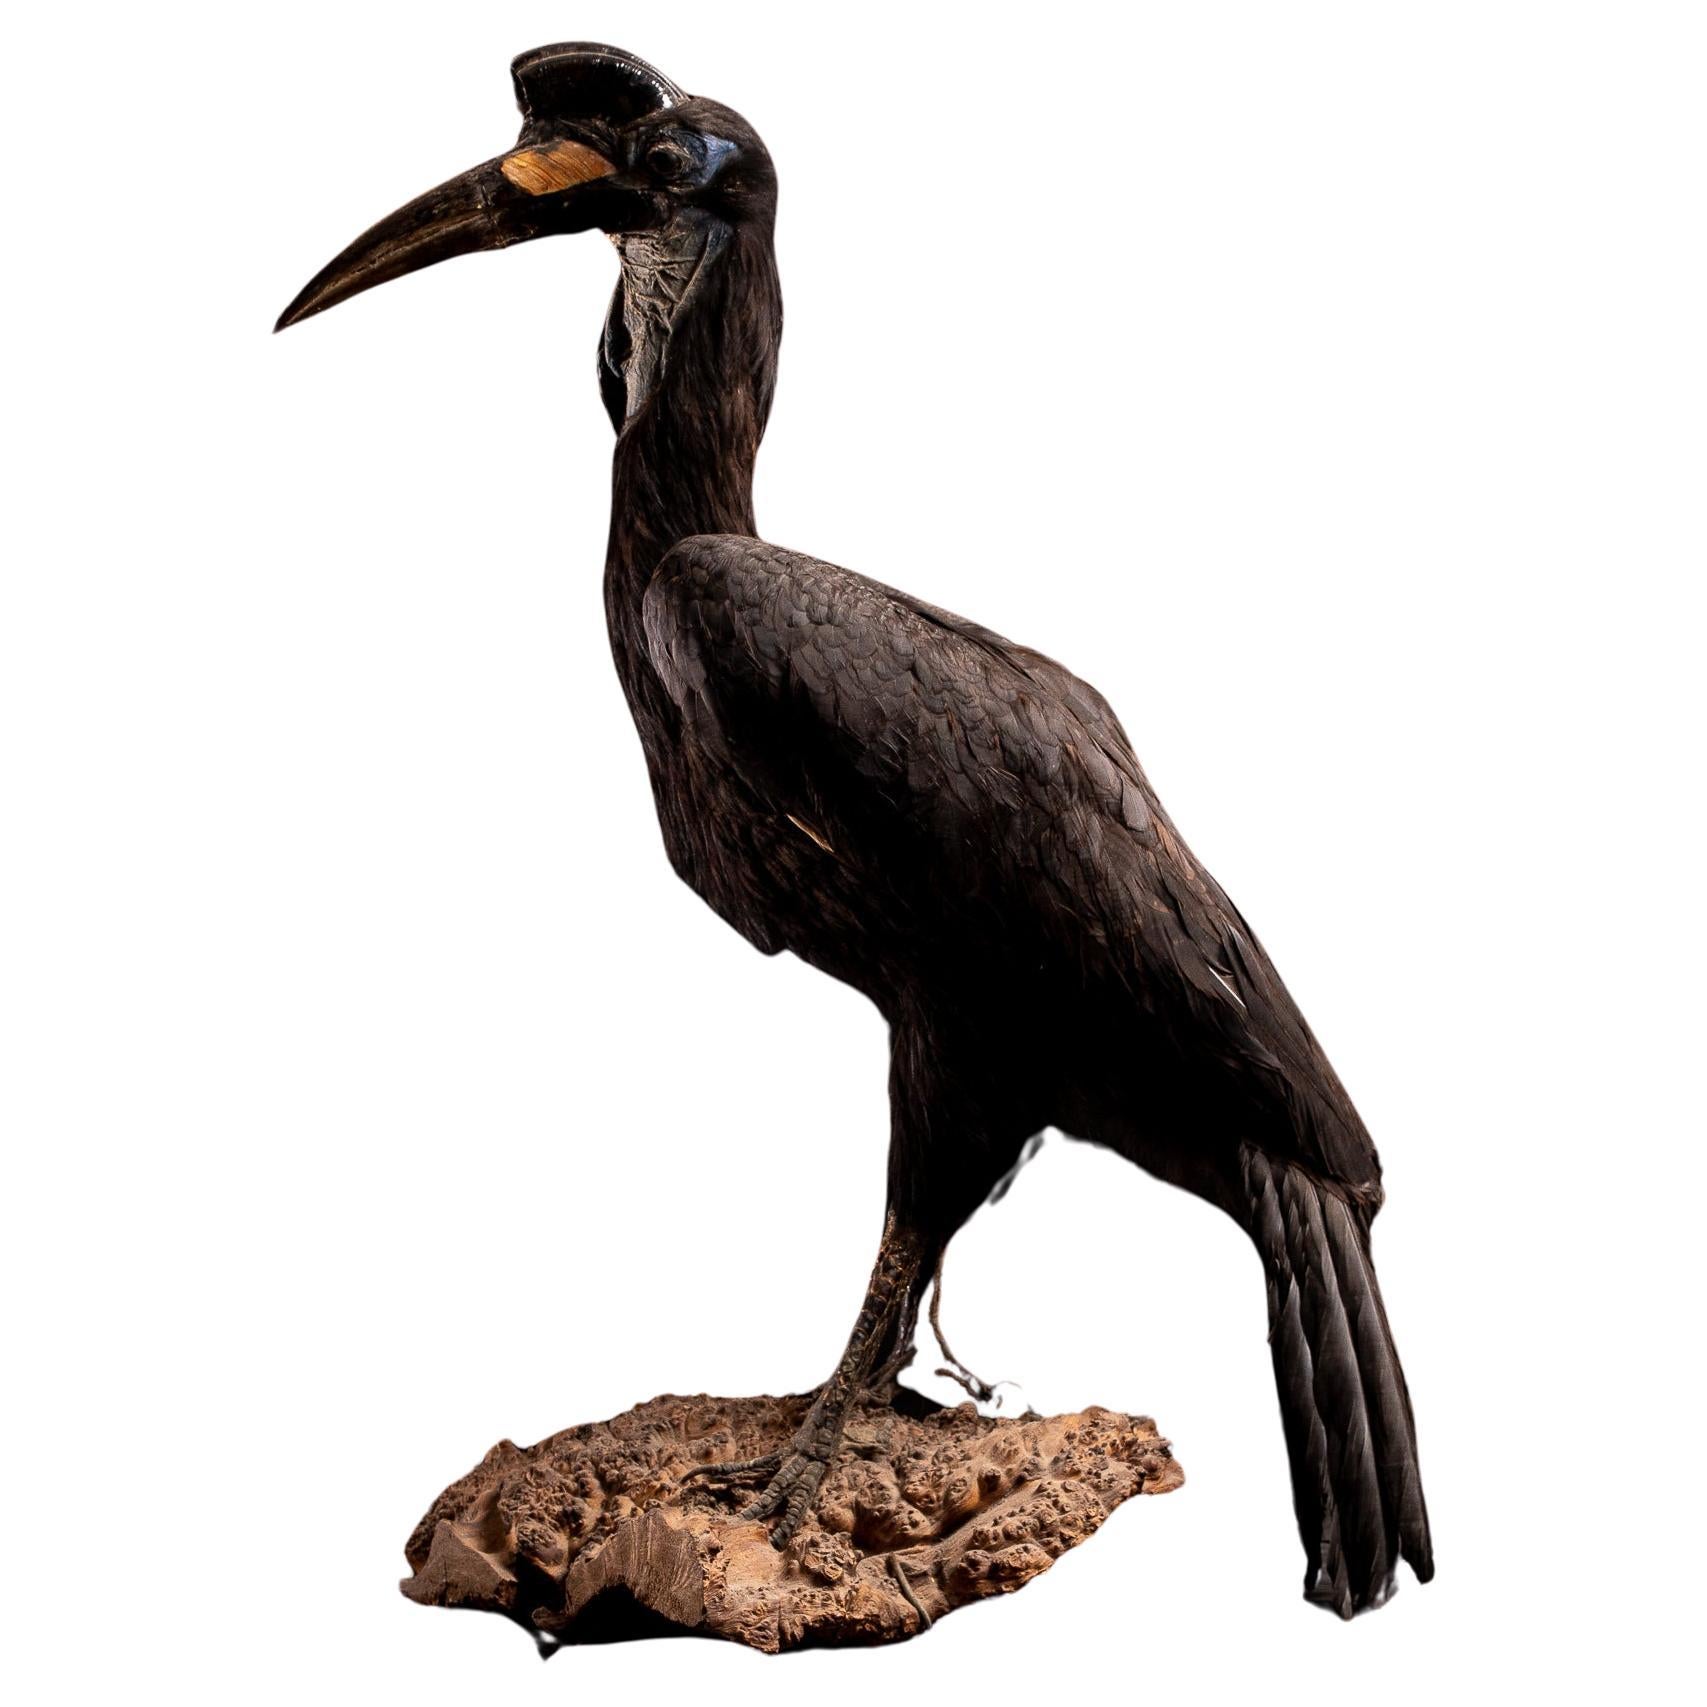 Abyssinian Ground Hornbill taxidermy on a Natural base-Bucorvus abyssinicus For Sale